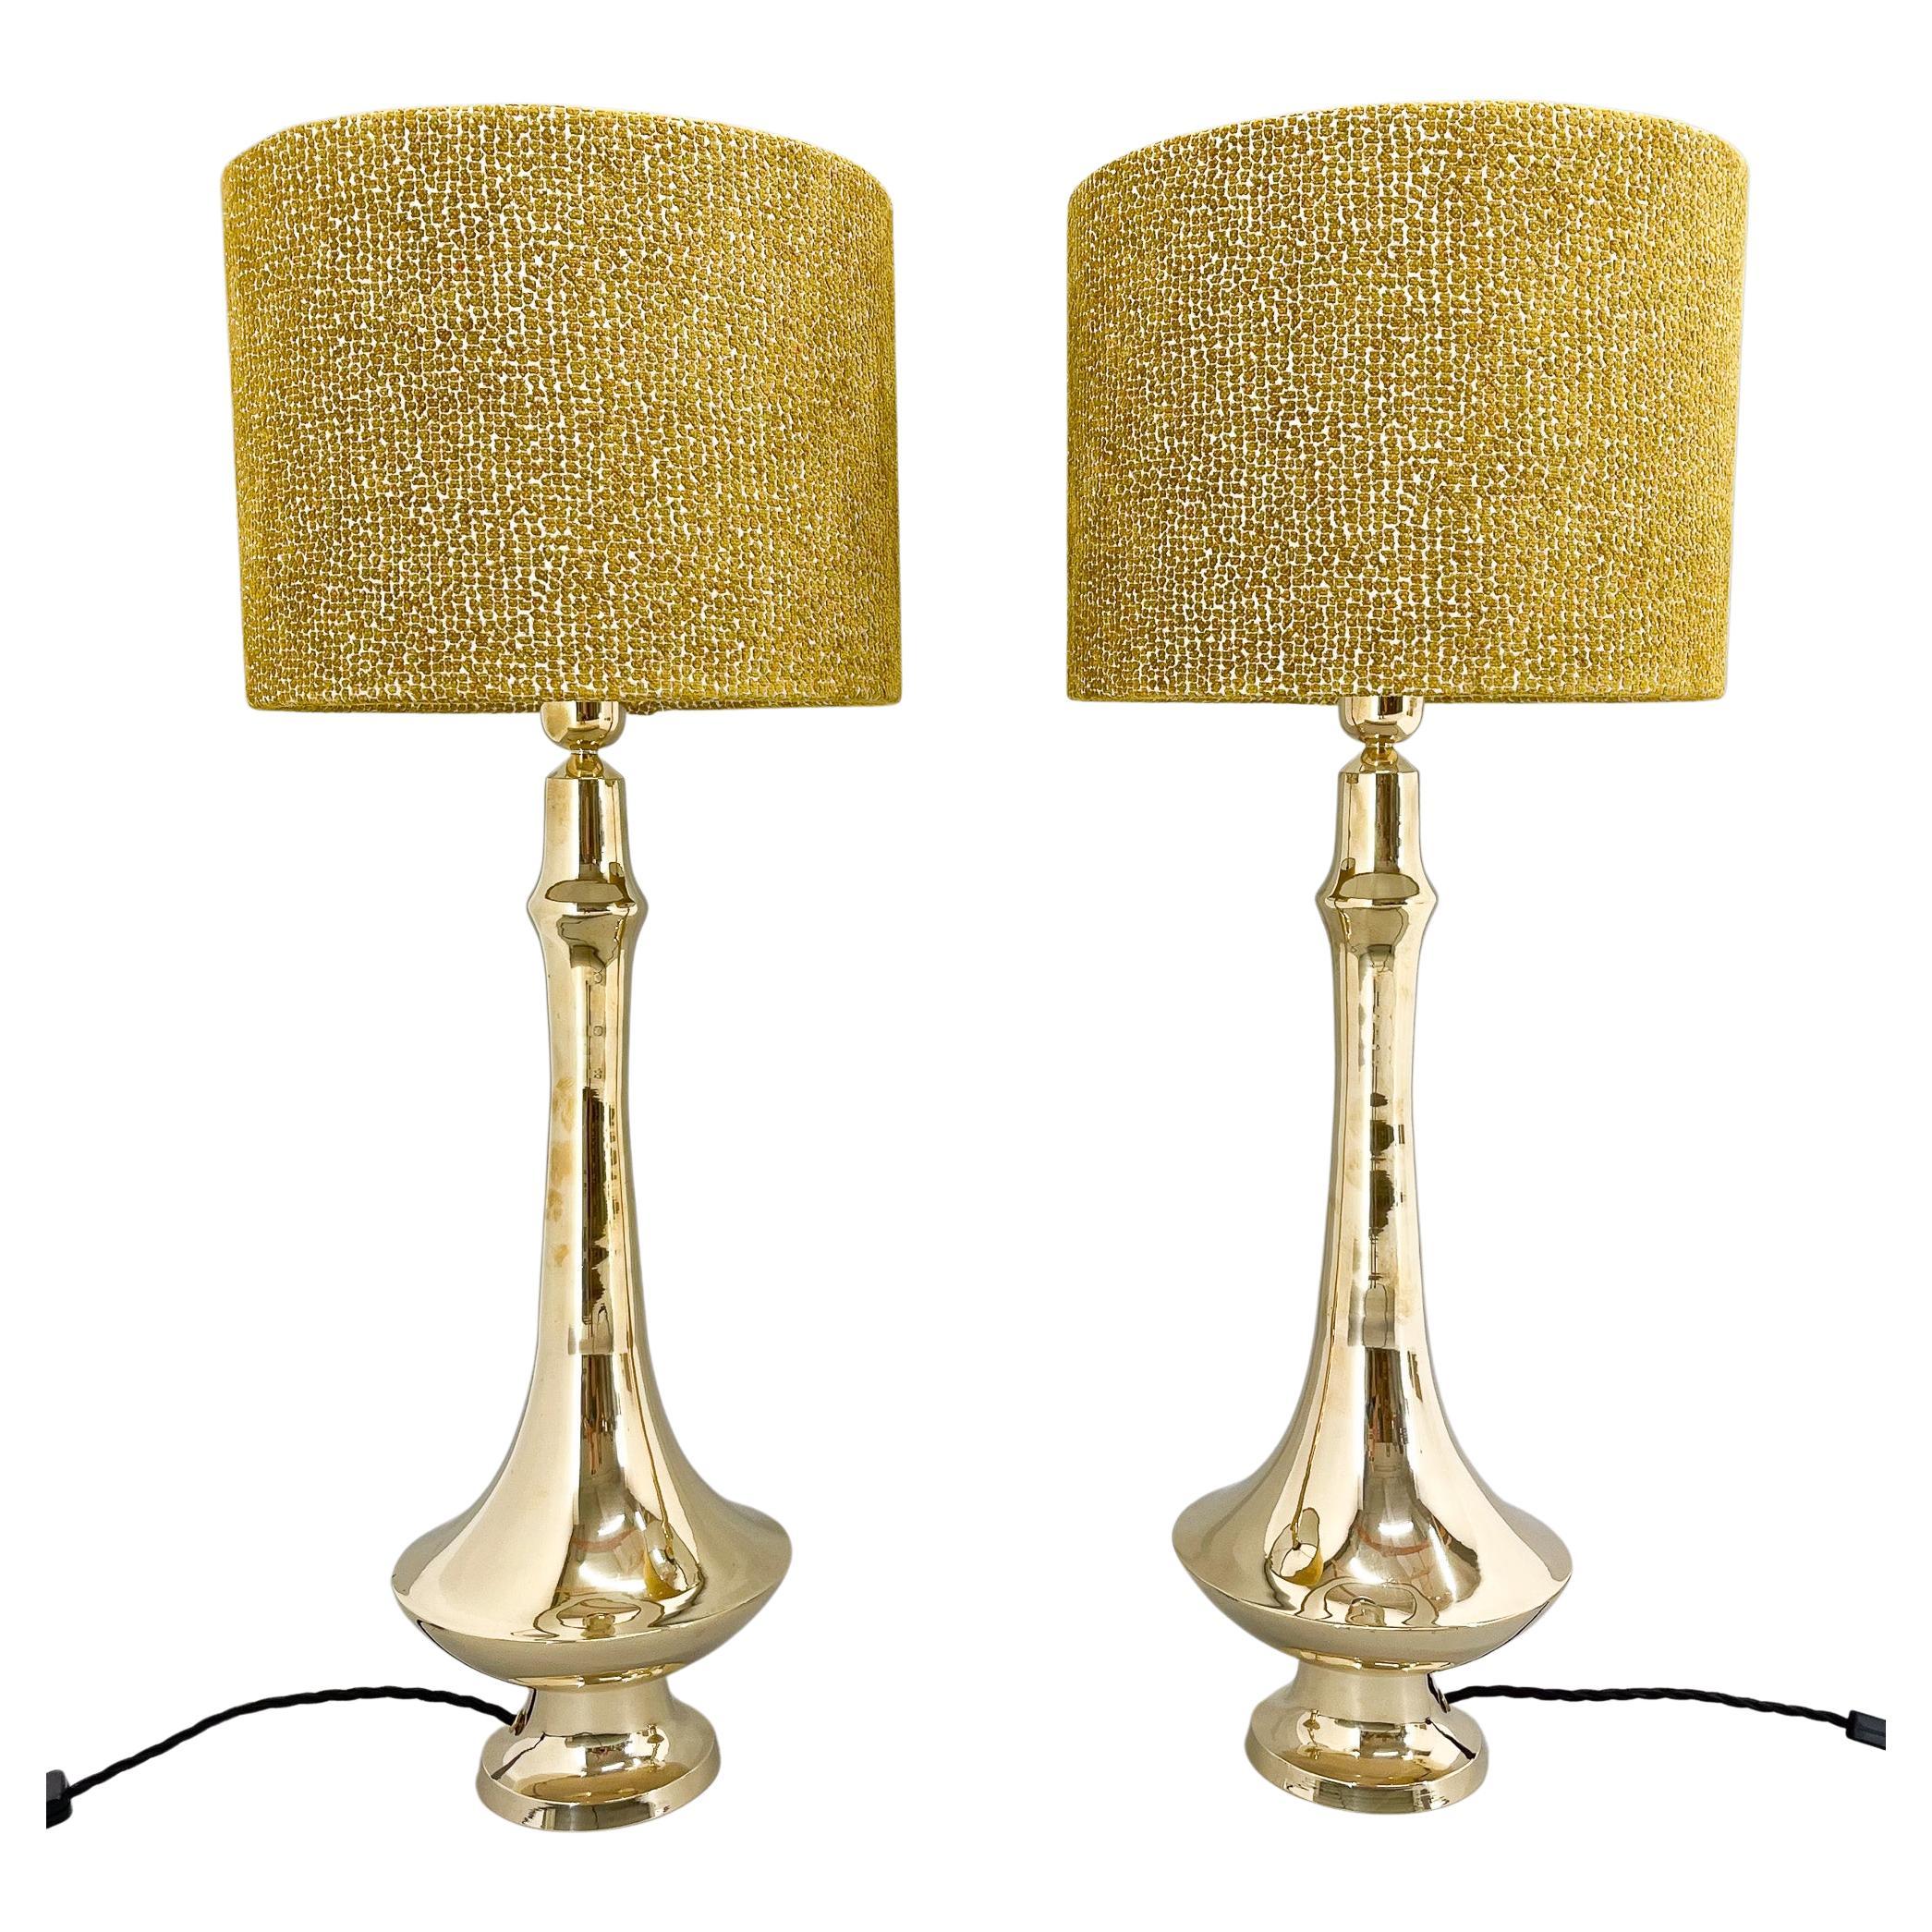 Pair of Tall Brass Table Lamps, 1950s, Restored For Sale